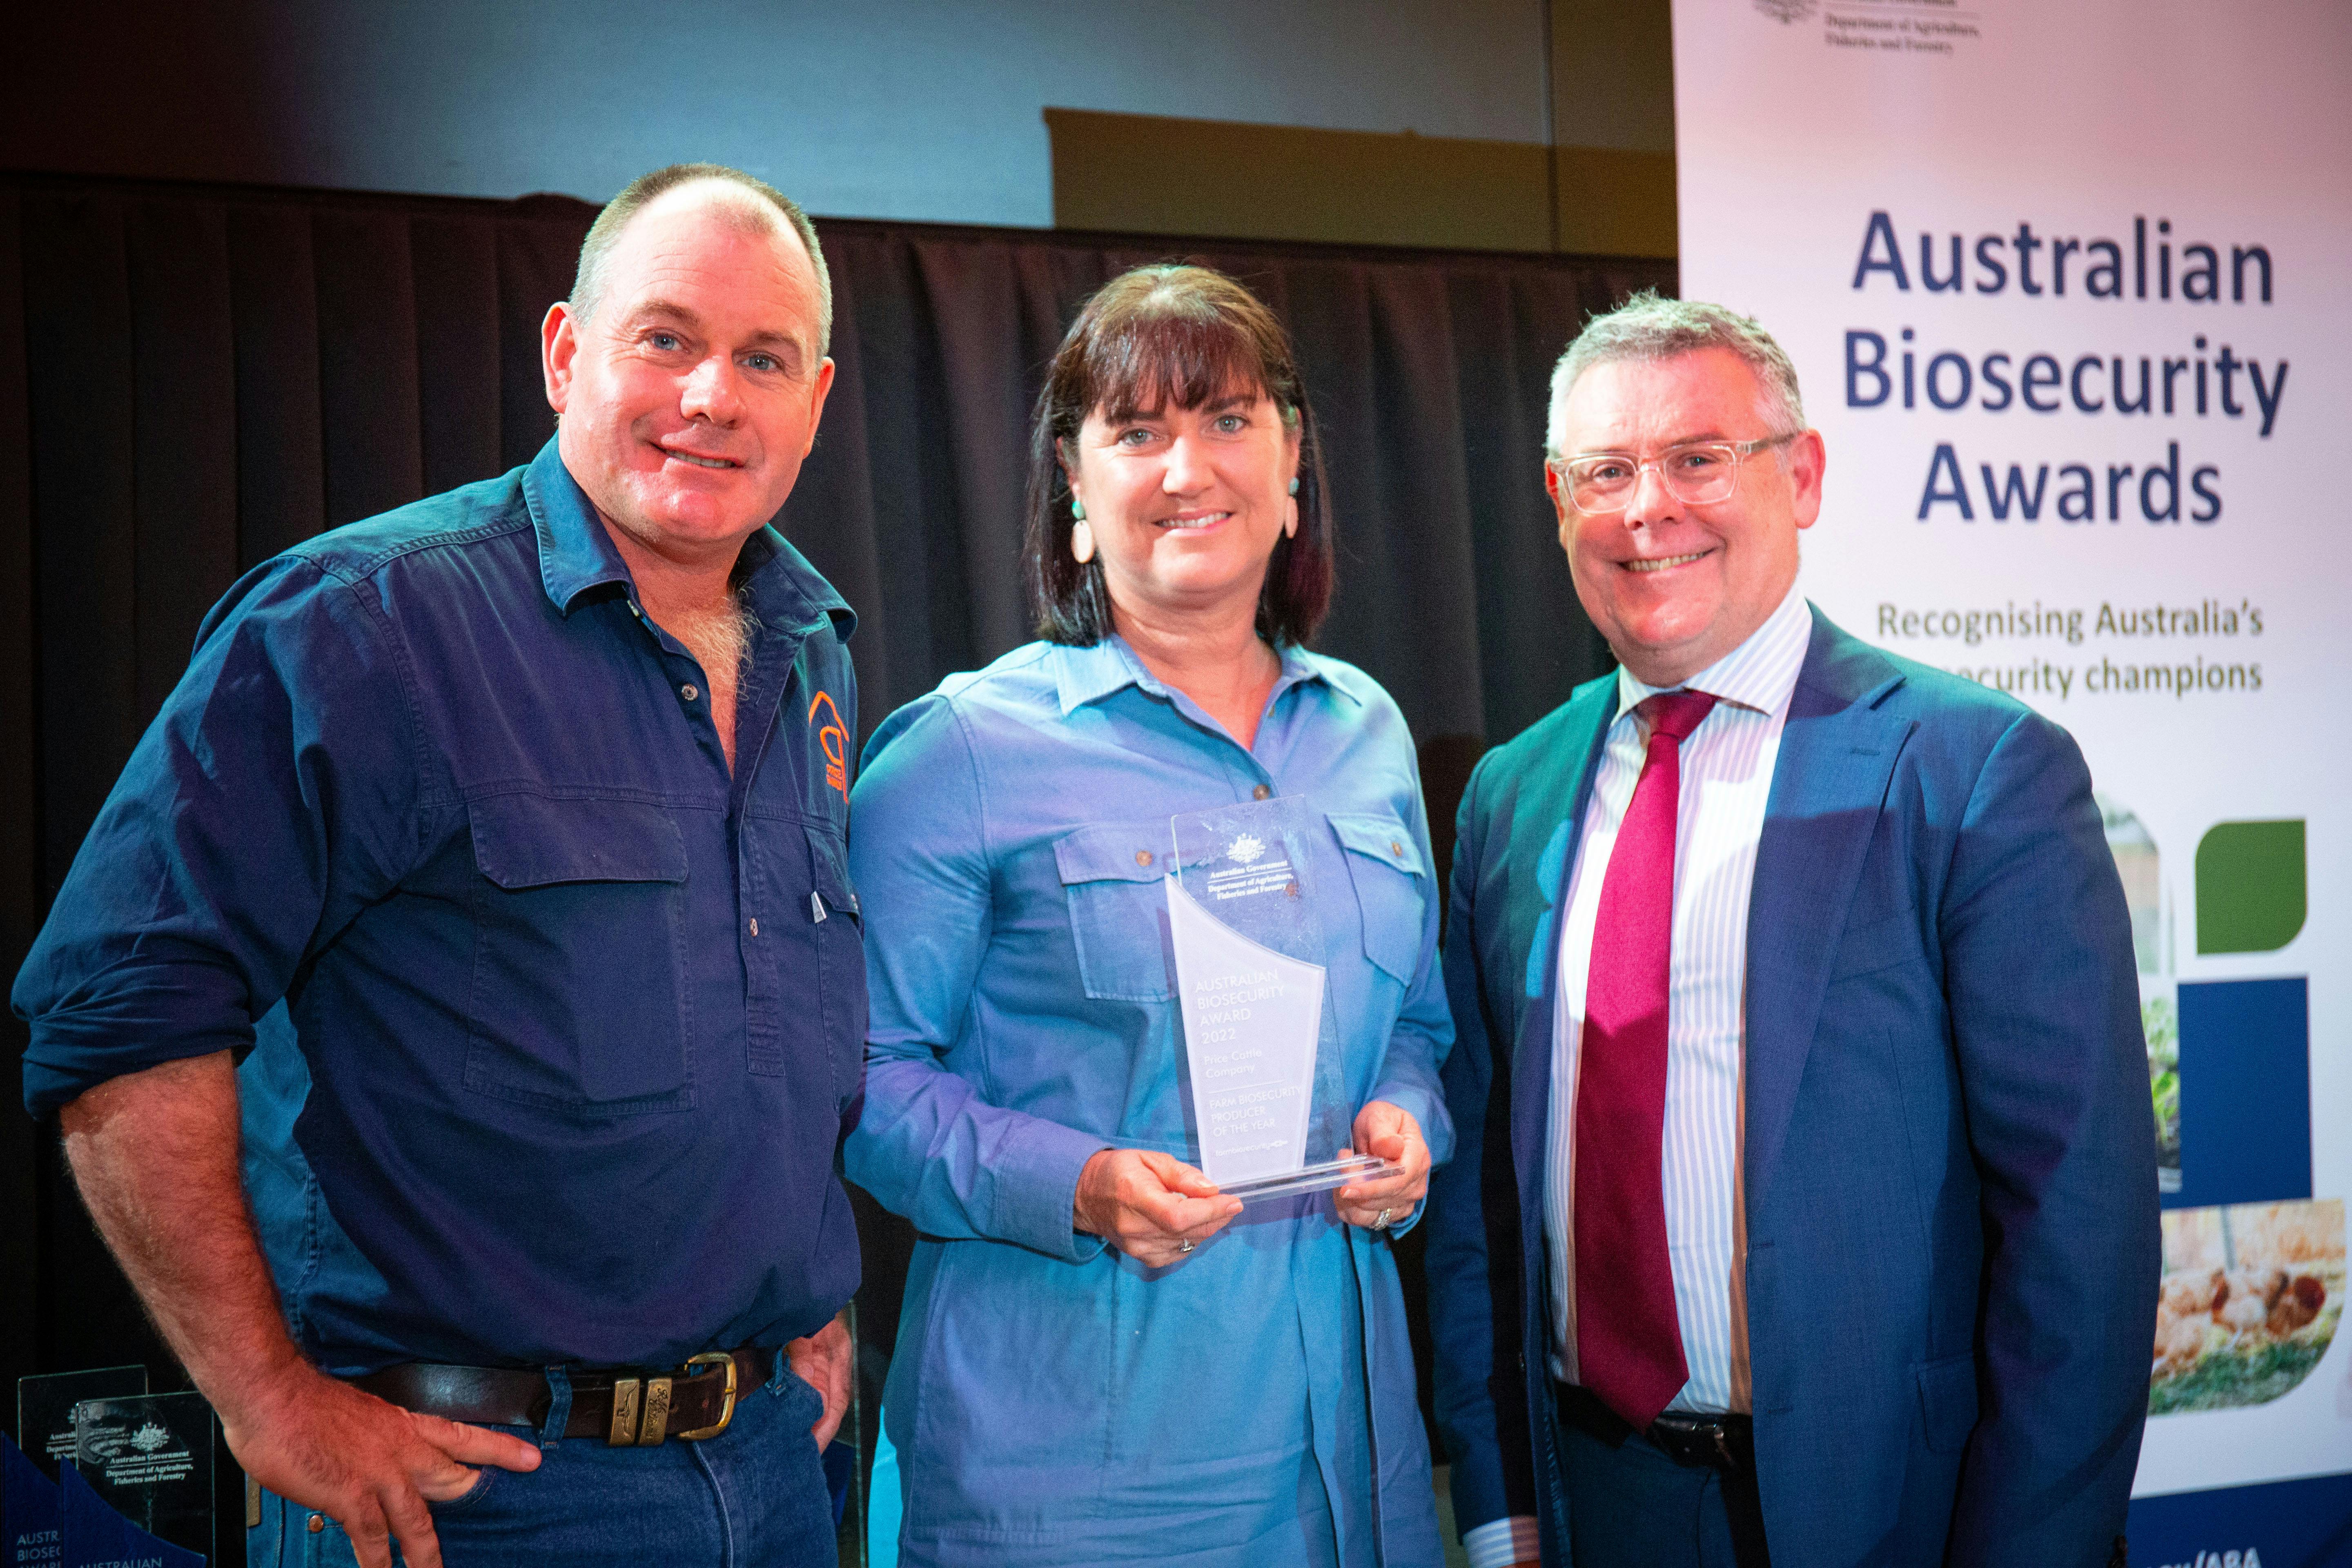 The Australian Biosecurity Awards dinner and ceremony was held on 4 April 2023.